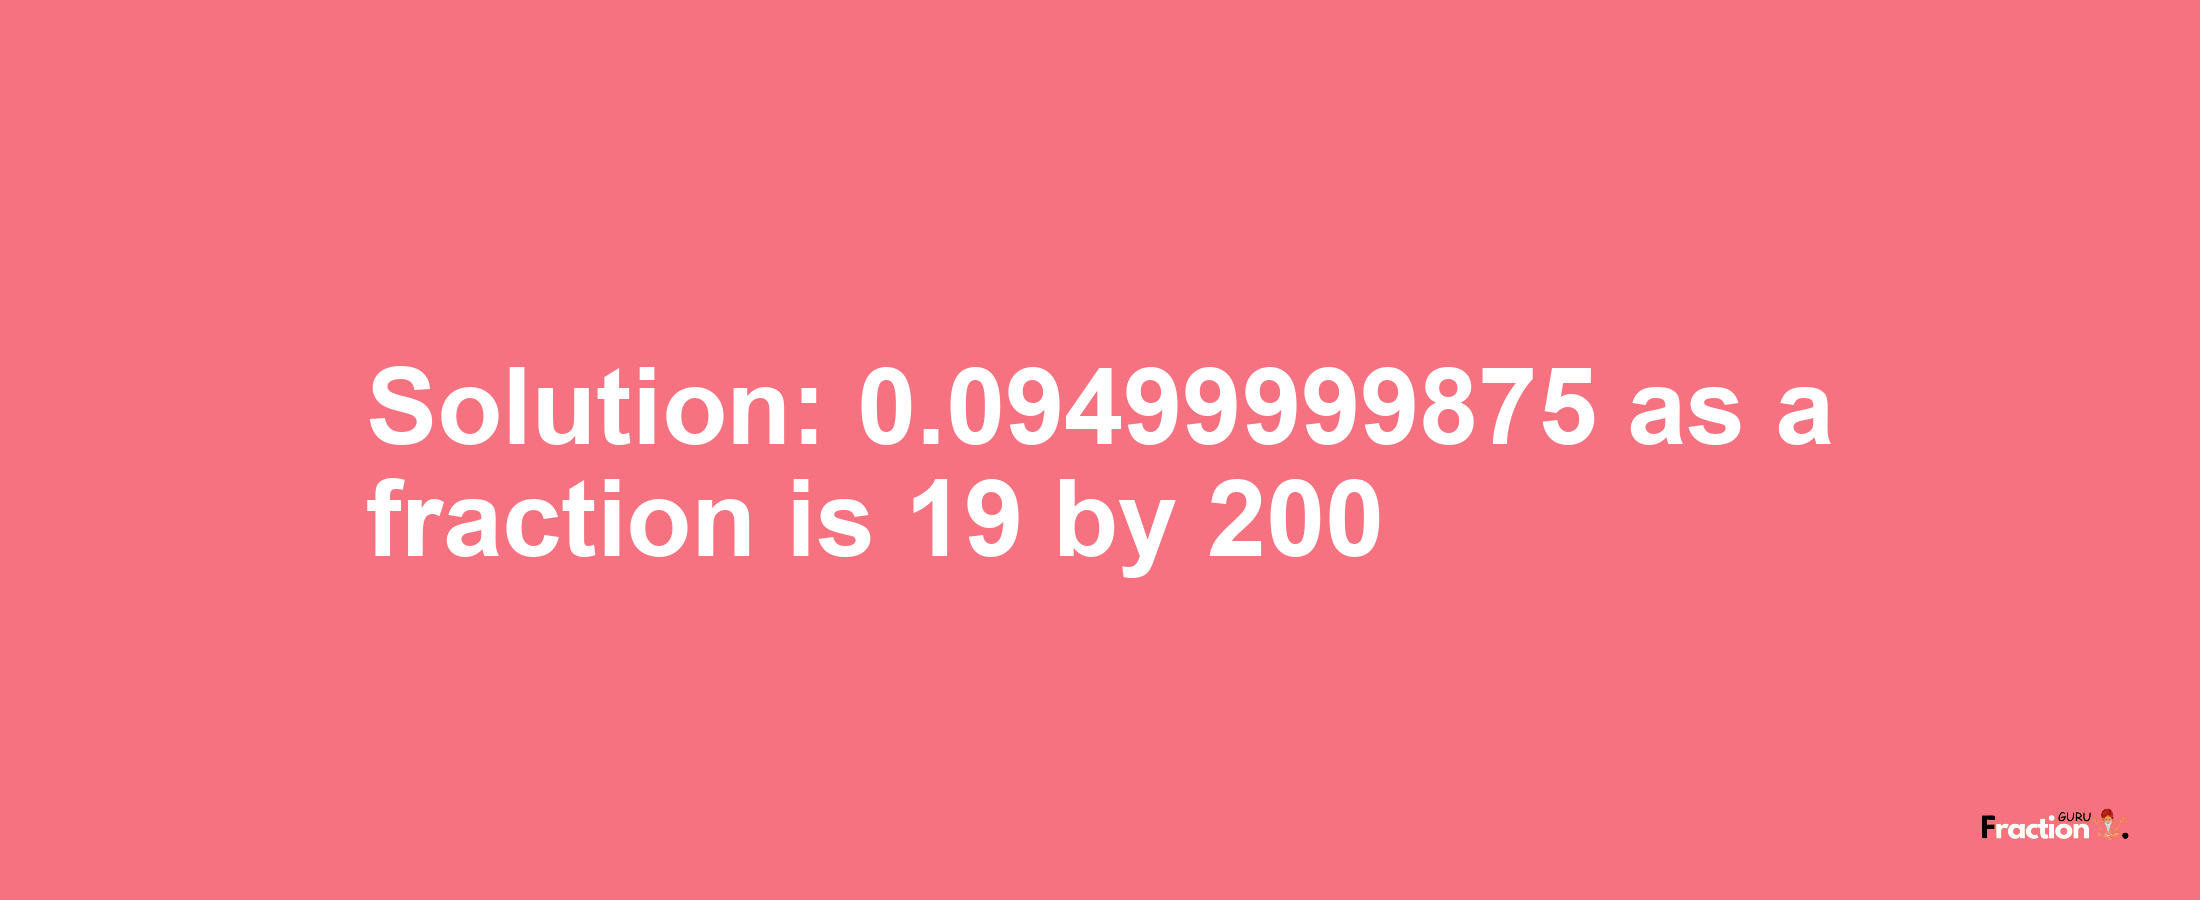 Solution:0.09499999875 as a fraction is 19/200